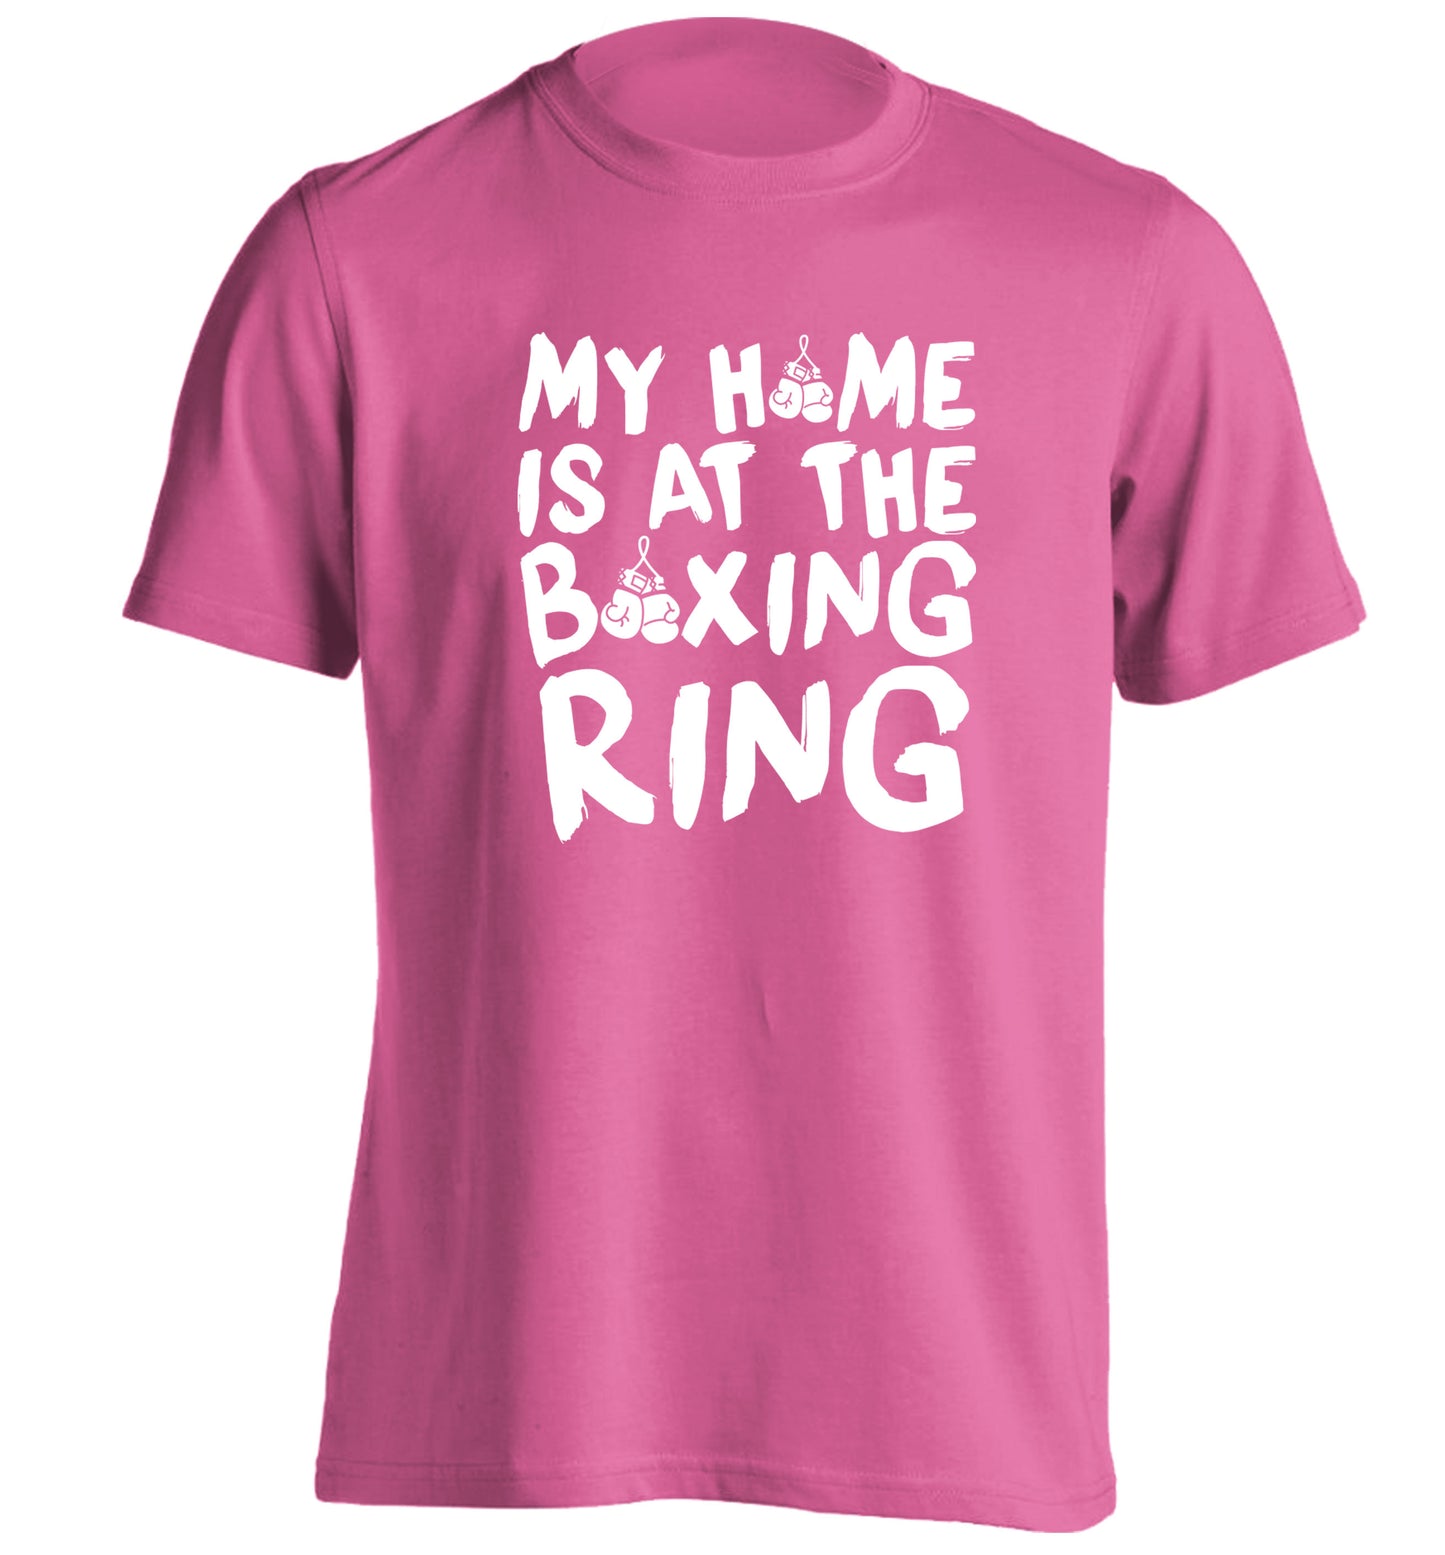 My home is at the boxing ring adults unisex pink Tshirt 2XL